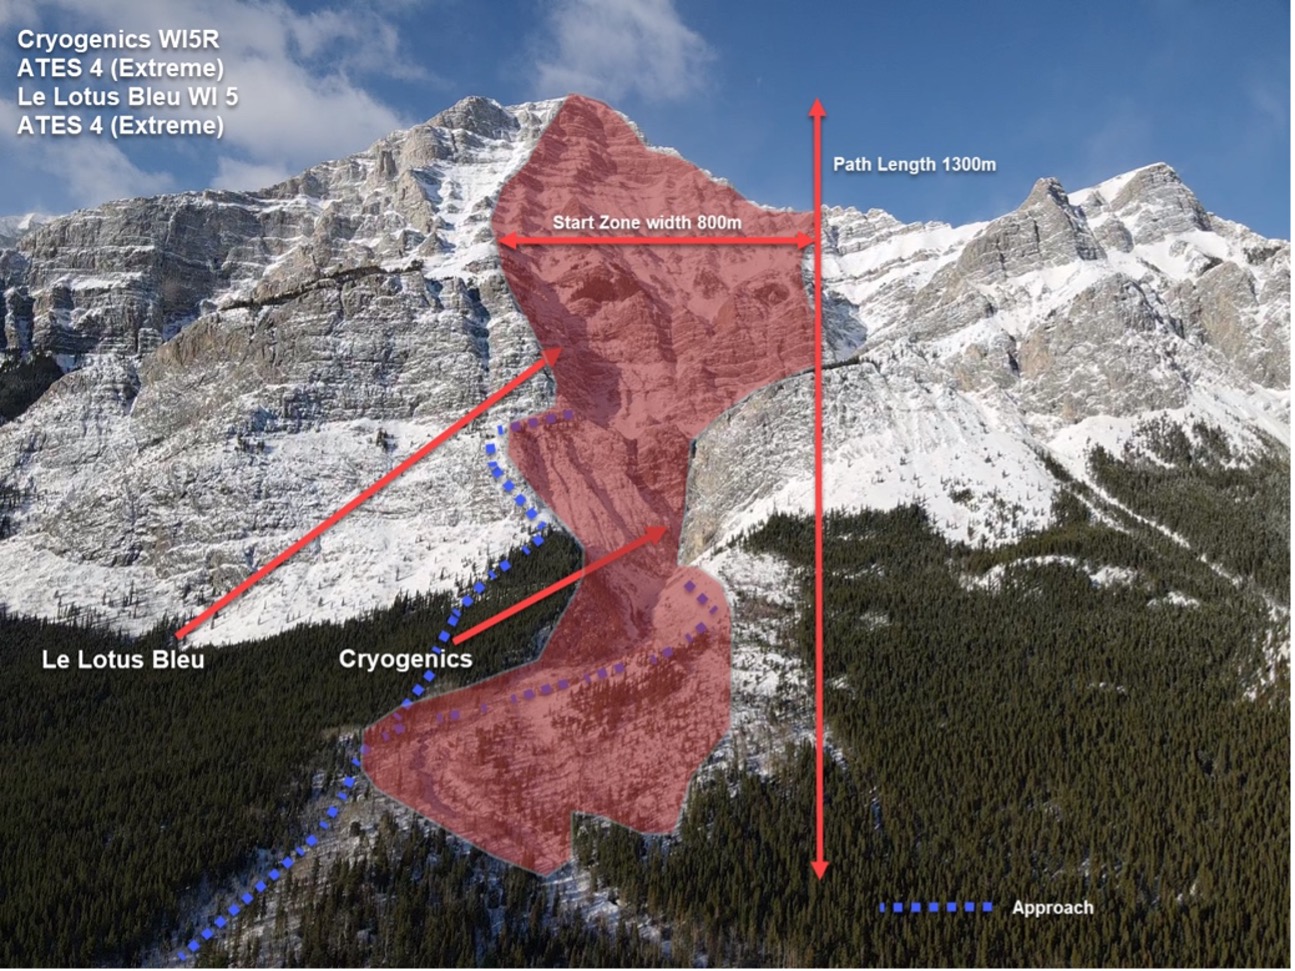 Image shows aerial image of Mt Kidd with ice climbs and avalanche terrain marked on it 